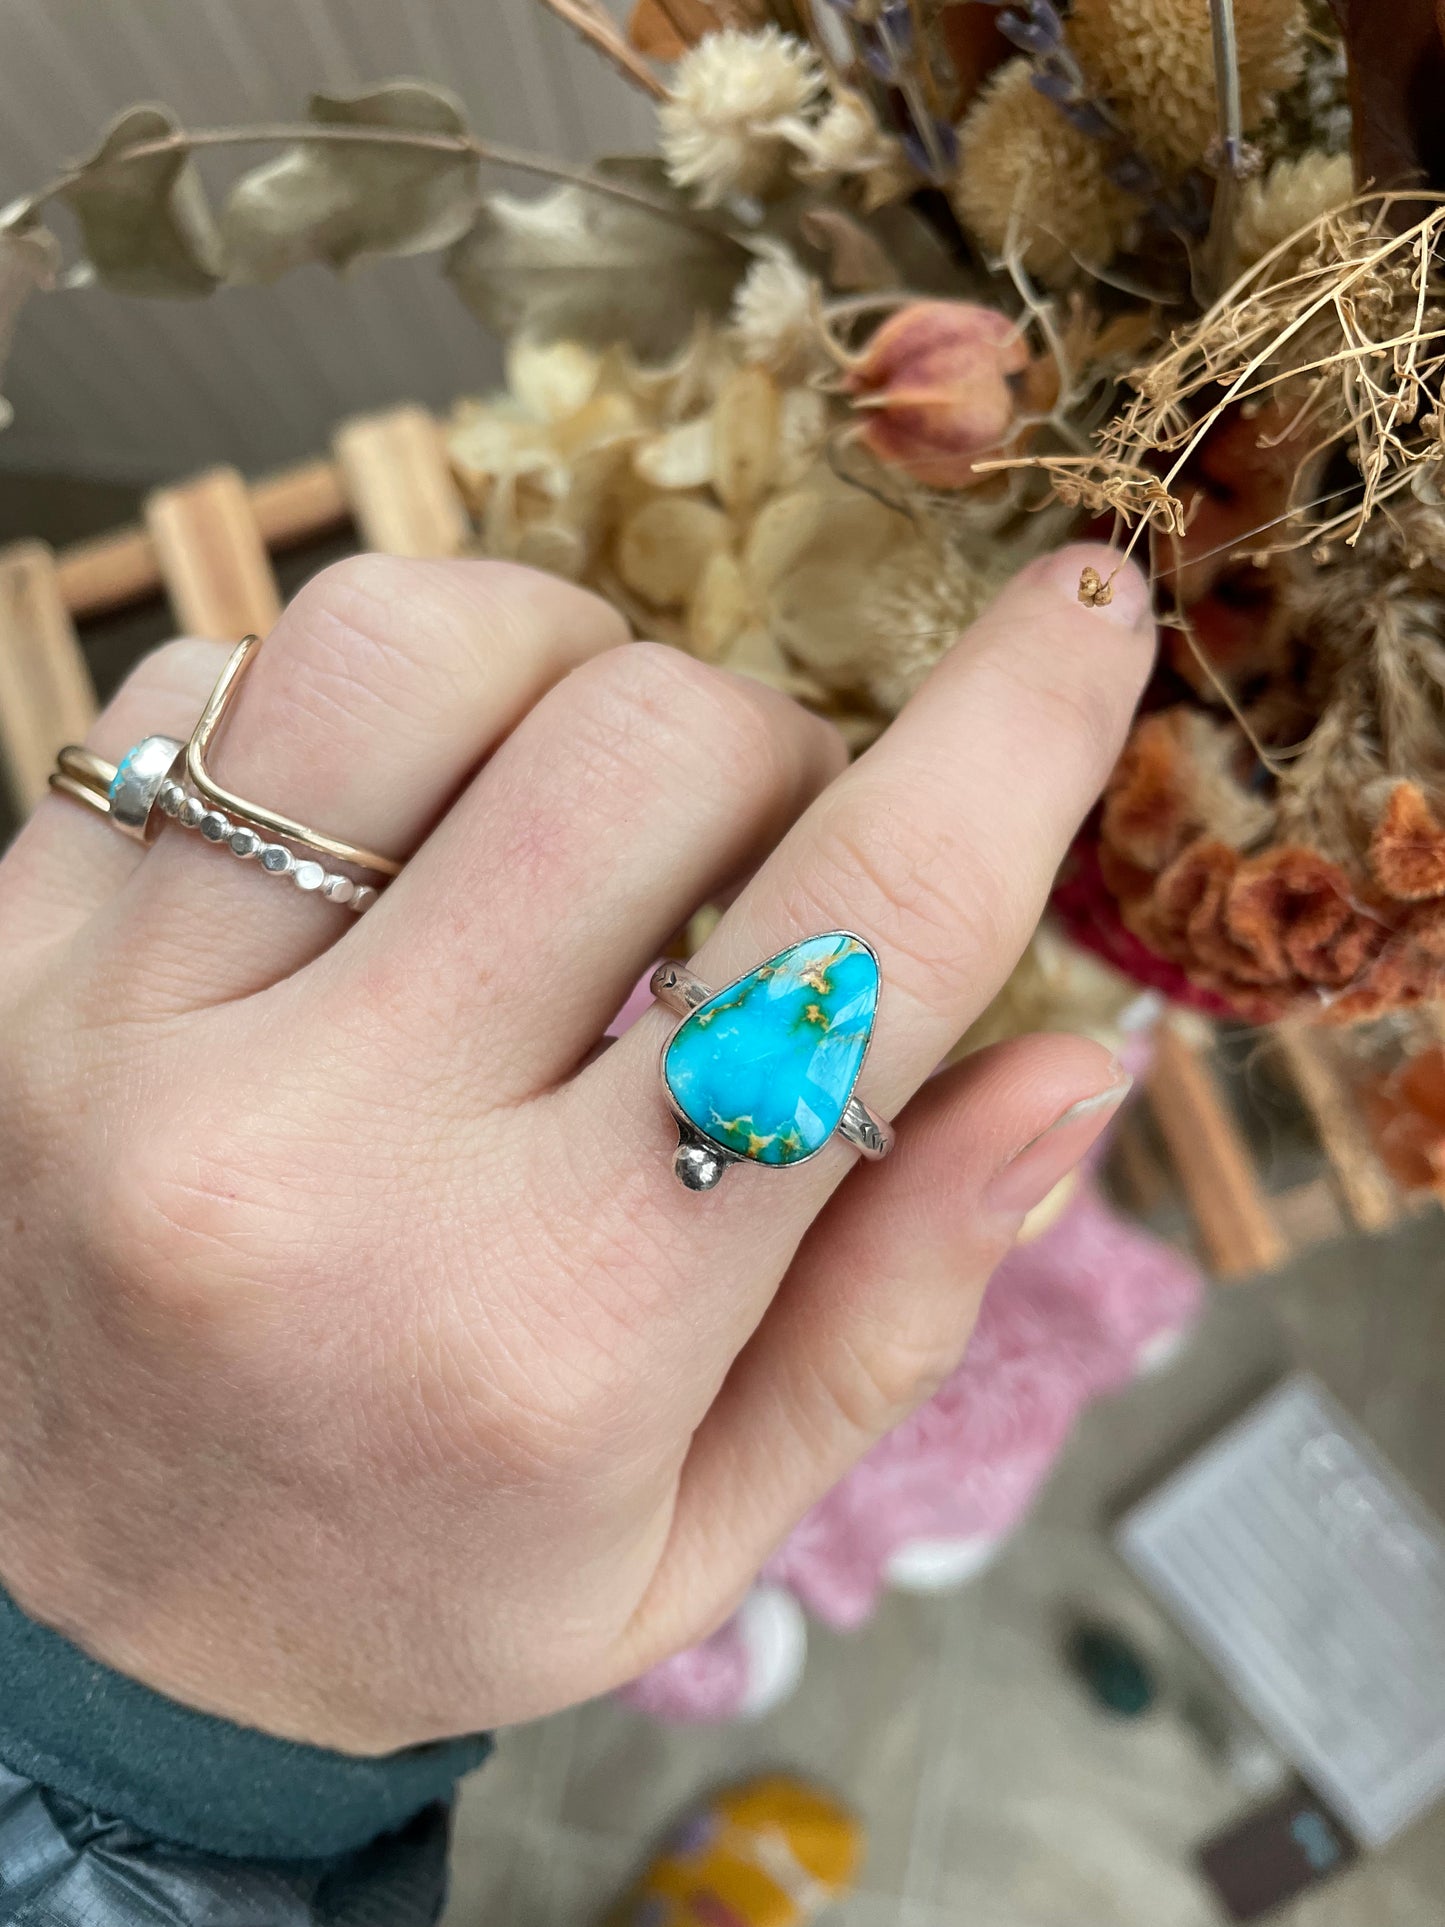 Sonoran Mountain Turquoise Ring - size 6 1/2